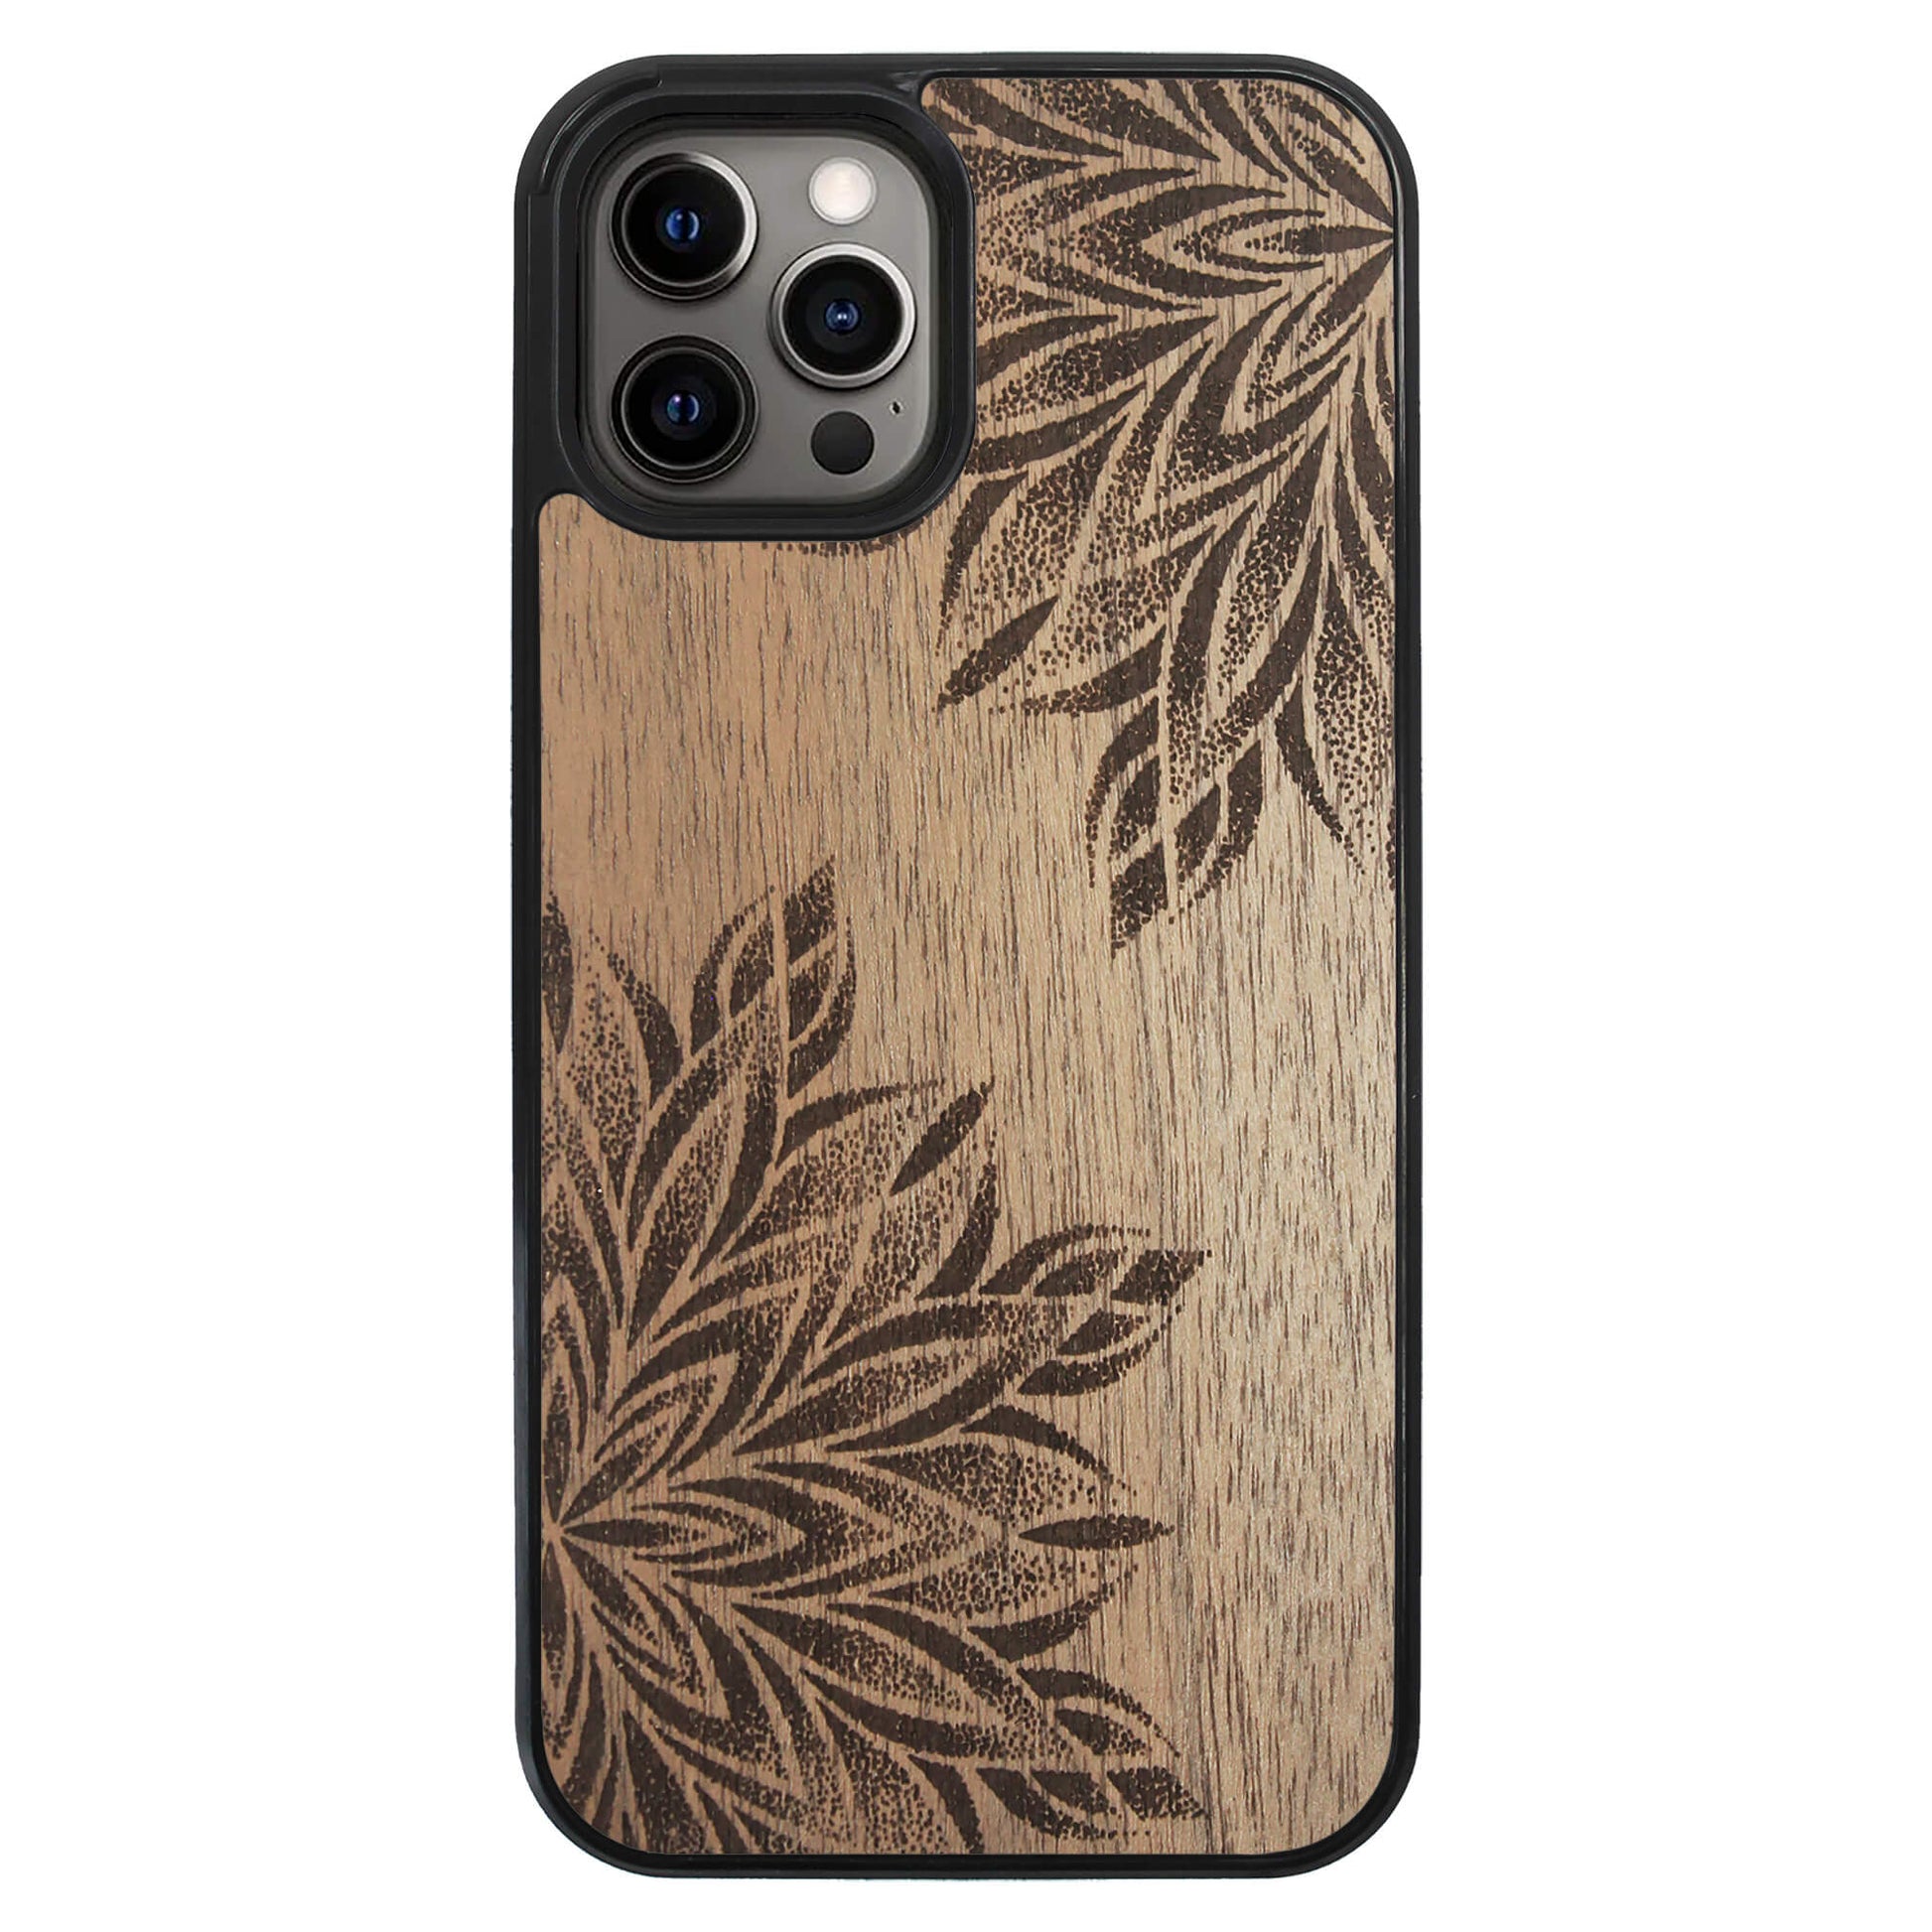 Wooden Case for iPhone 12 Pro Max Mandala